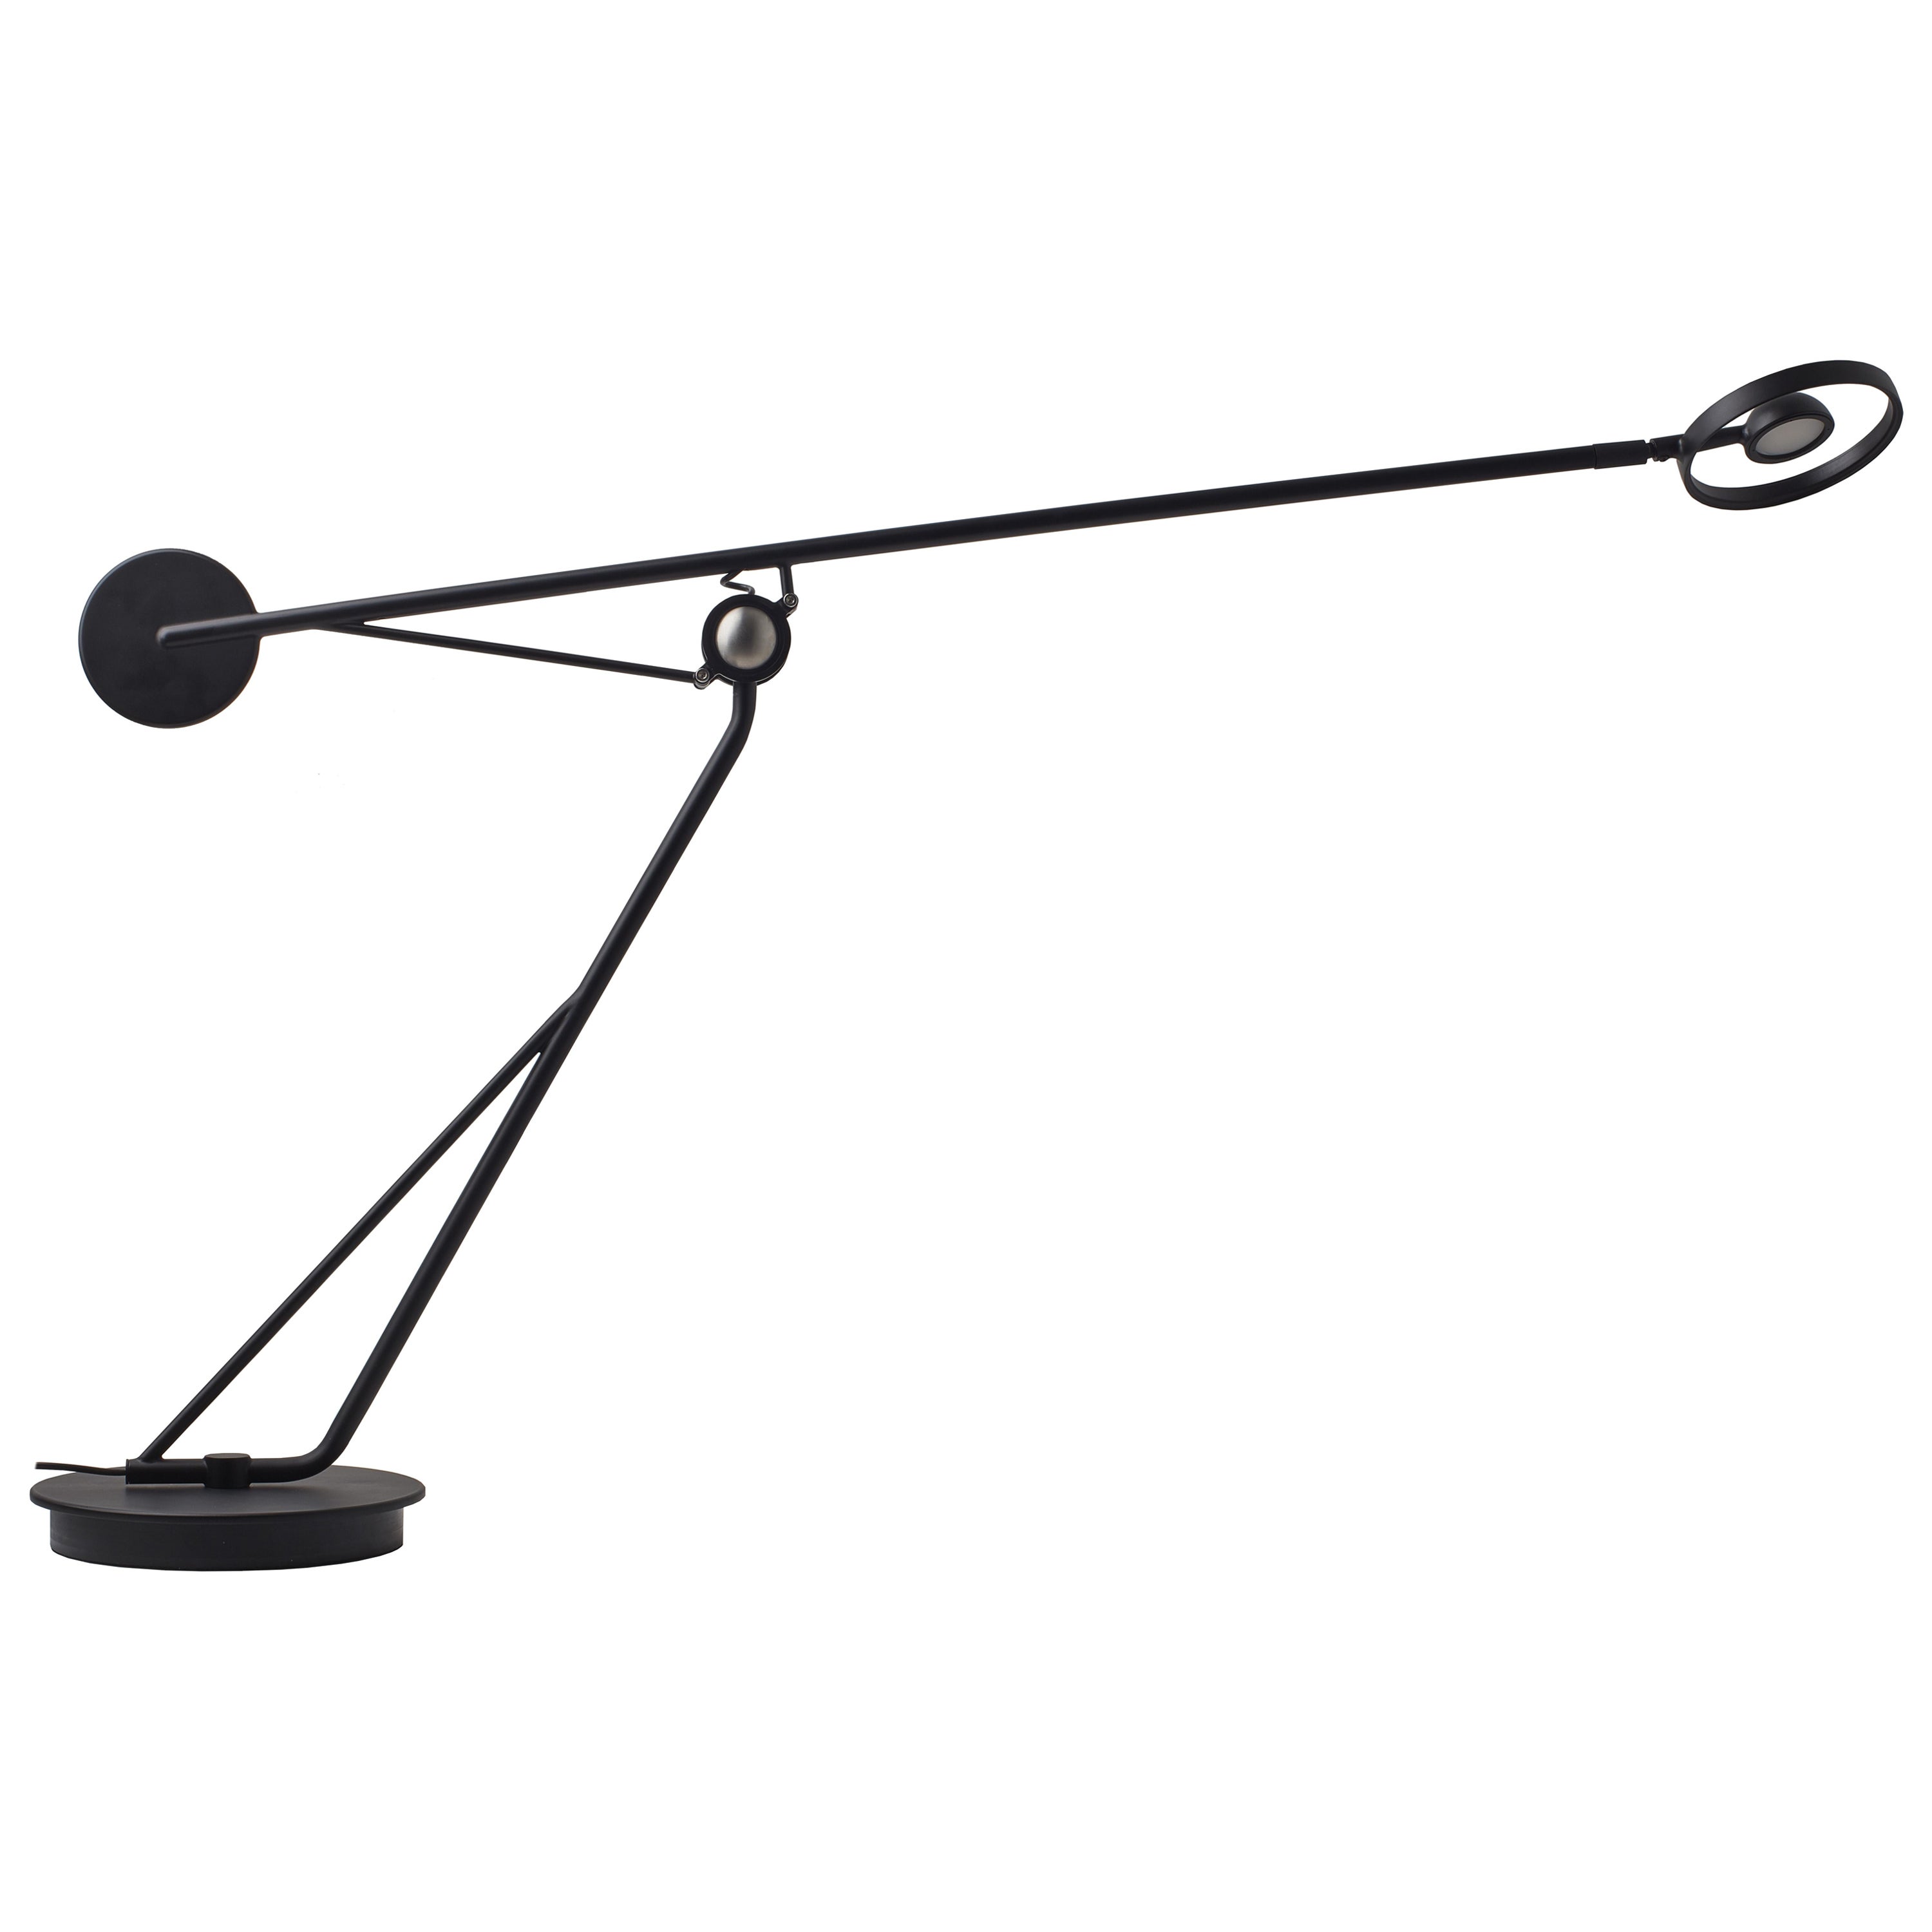 DCW Editions Aaro Table Lamp in Black Anodized Aluminium by Simon Schmitz For Sale